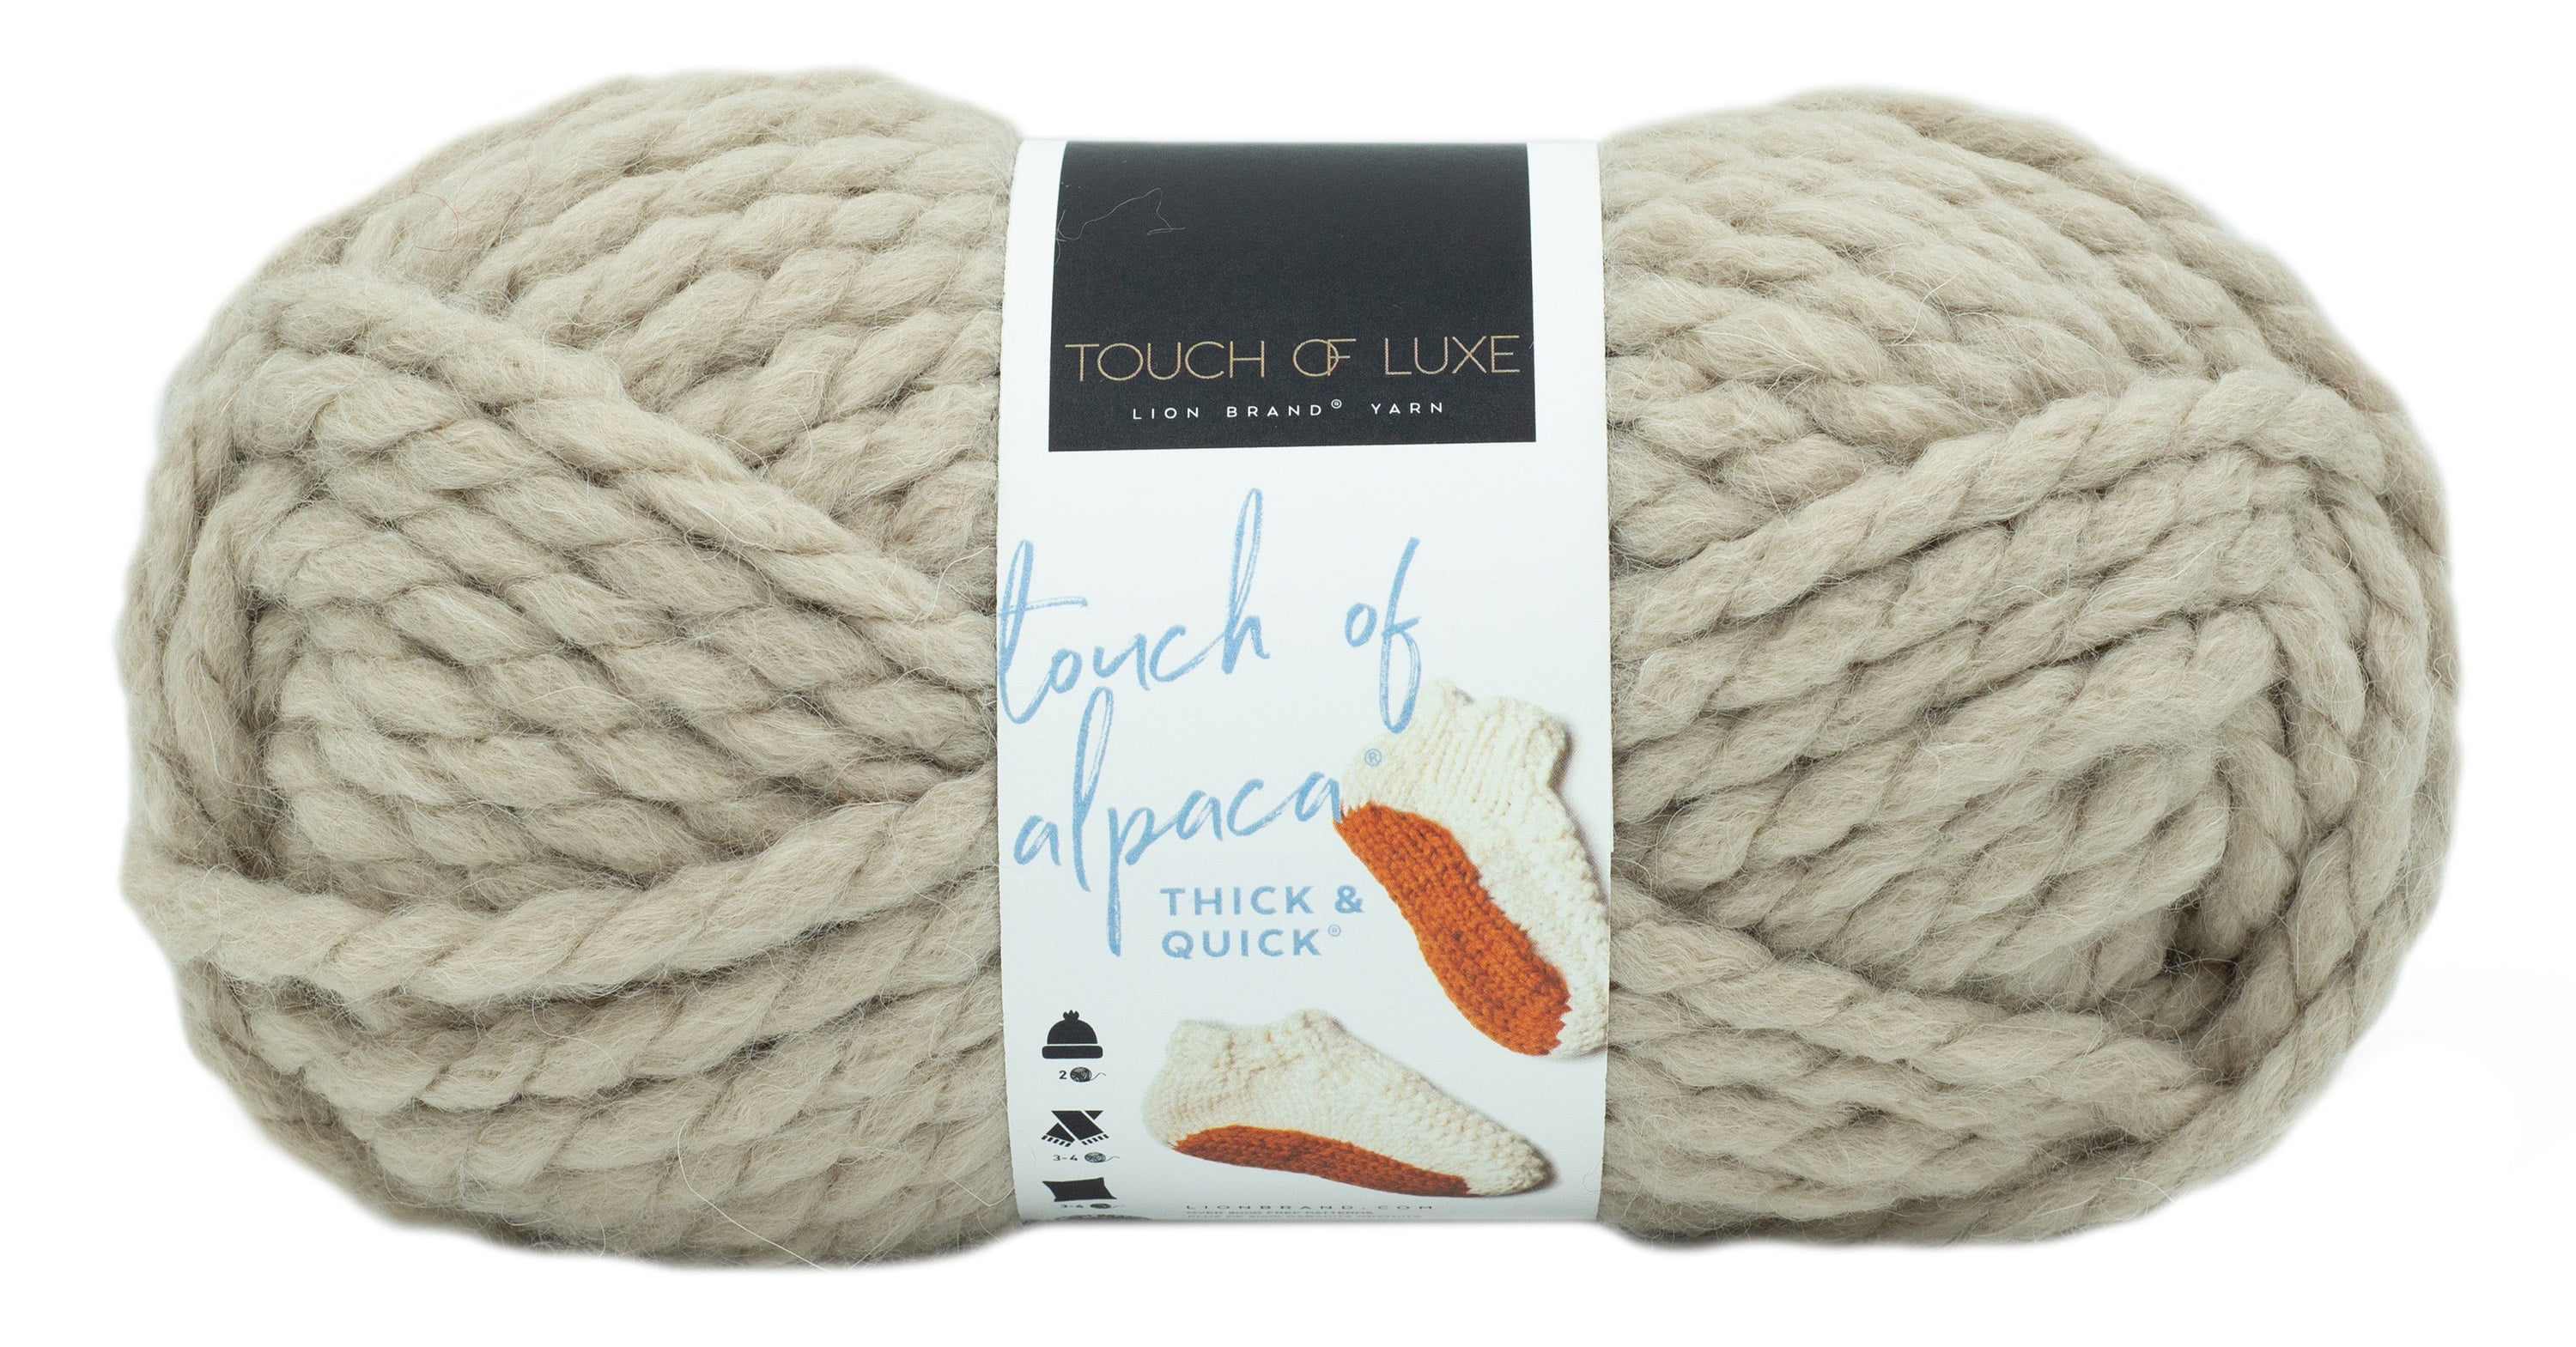 Lion Brand Touch of Alpaca Thick & Quick Yarn - Mineral, 44 yds 